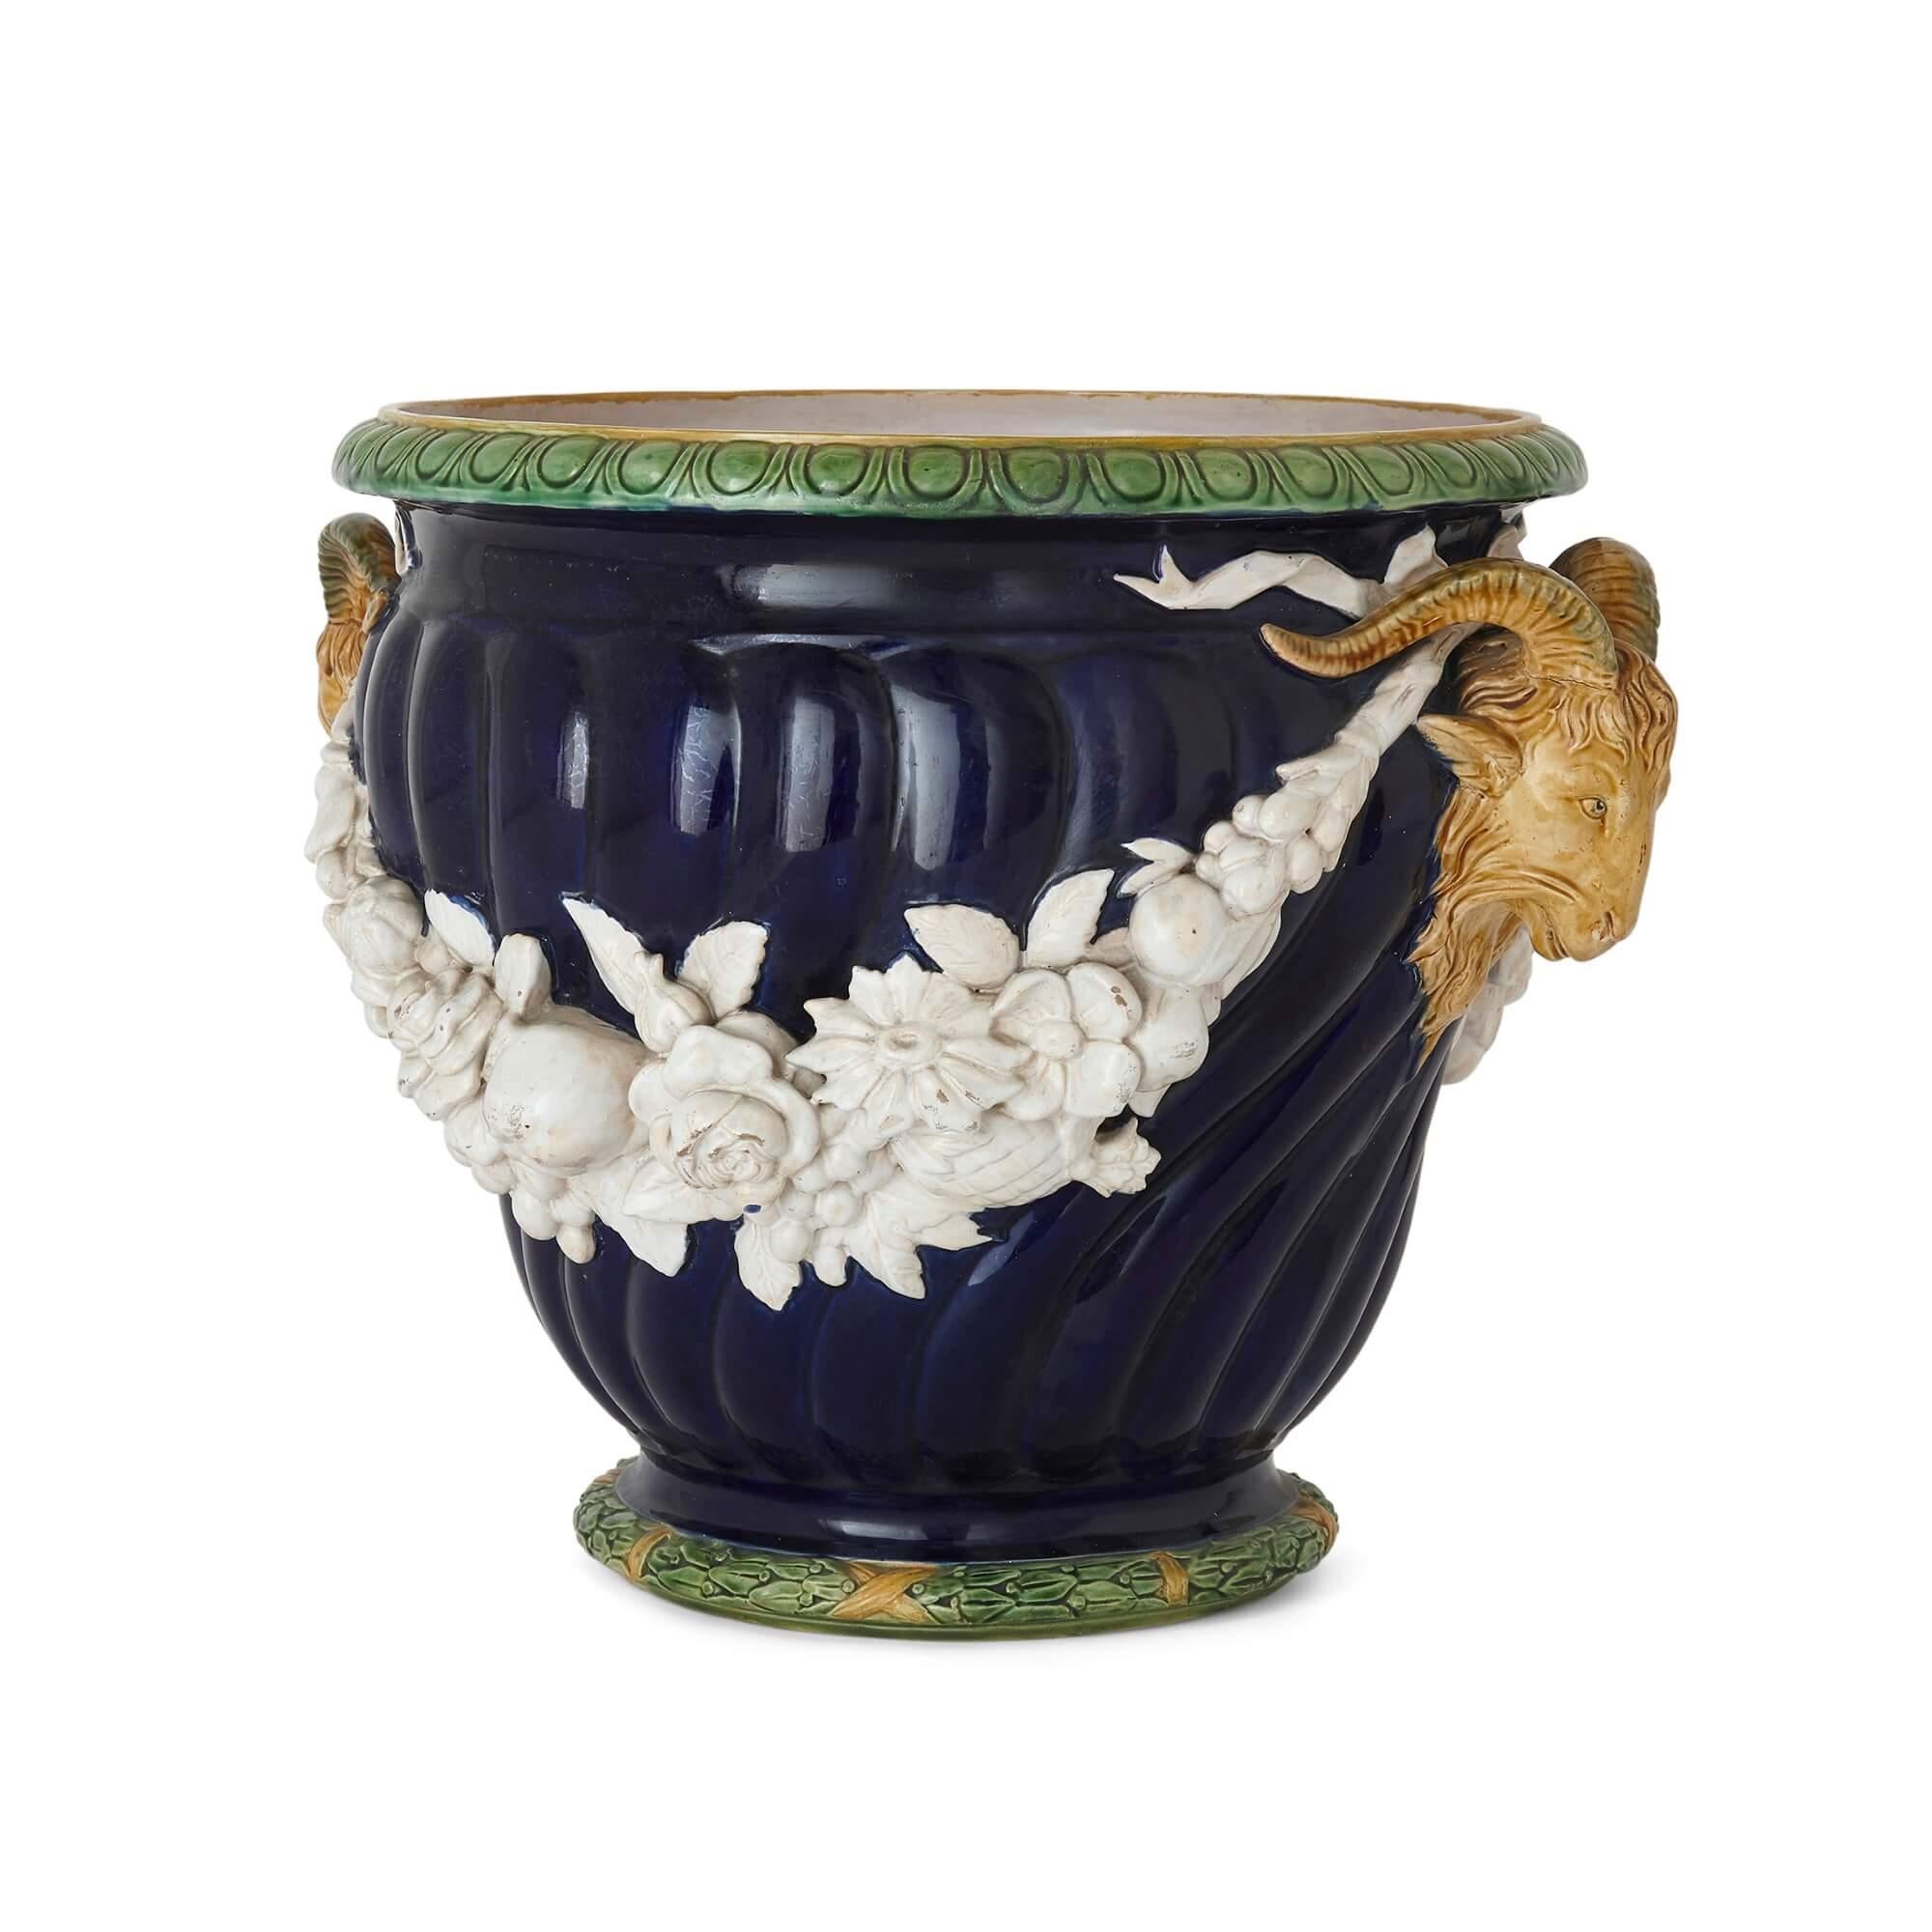 Neoclassical style blue Majolica planter by Minton
English, c. 1852
Measures: height 37.5cm, width 49cm, depth 42cm

This superb planter is crafted in the Victorian manner from brightly coloured majolica. The planter features a spirally fluted